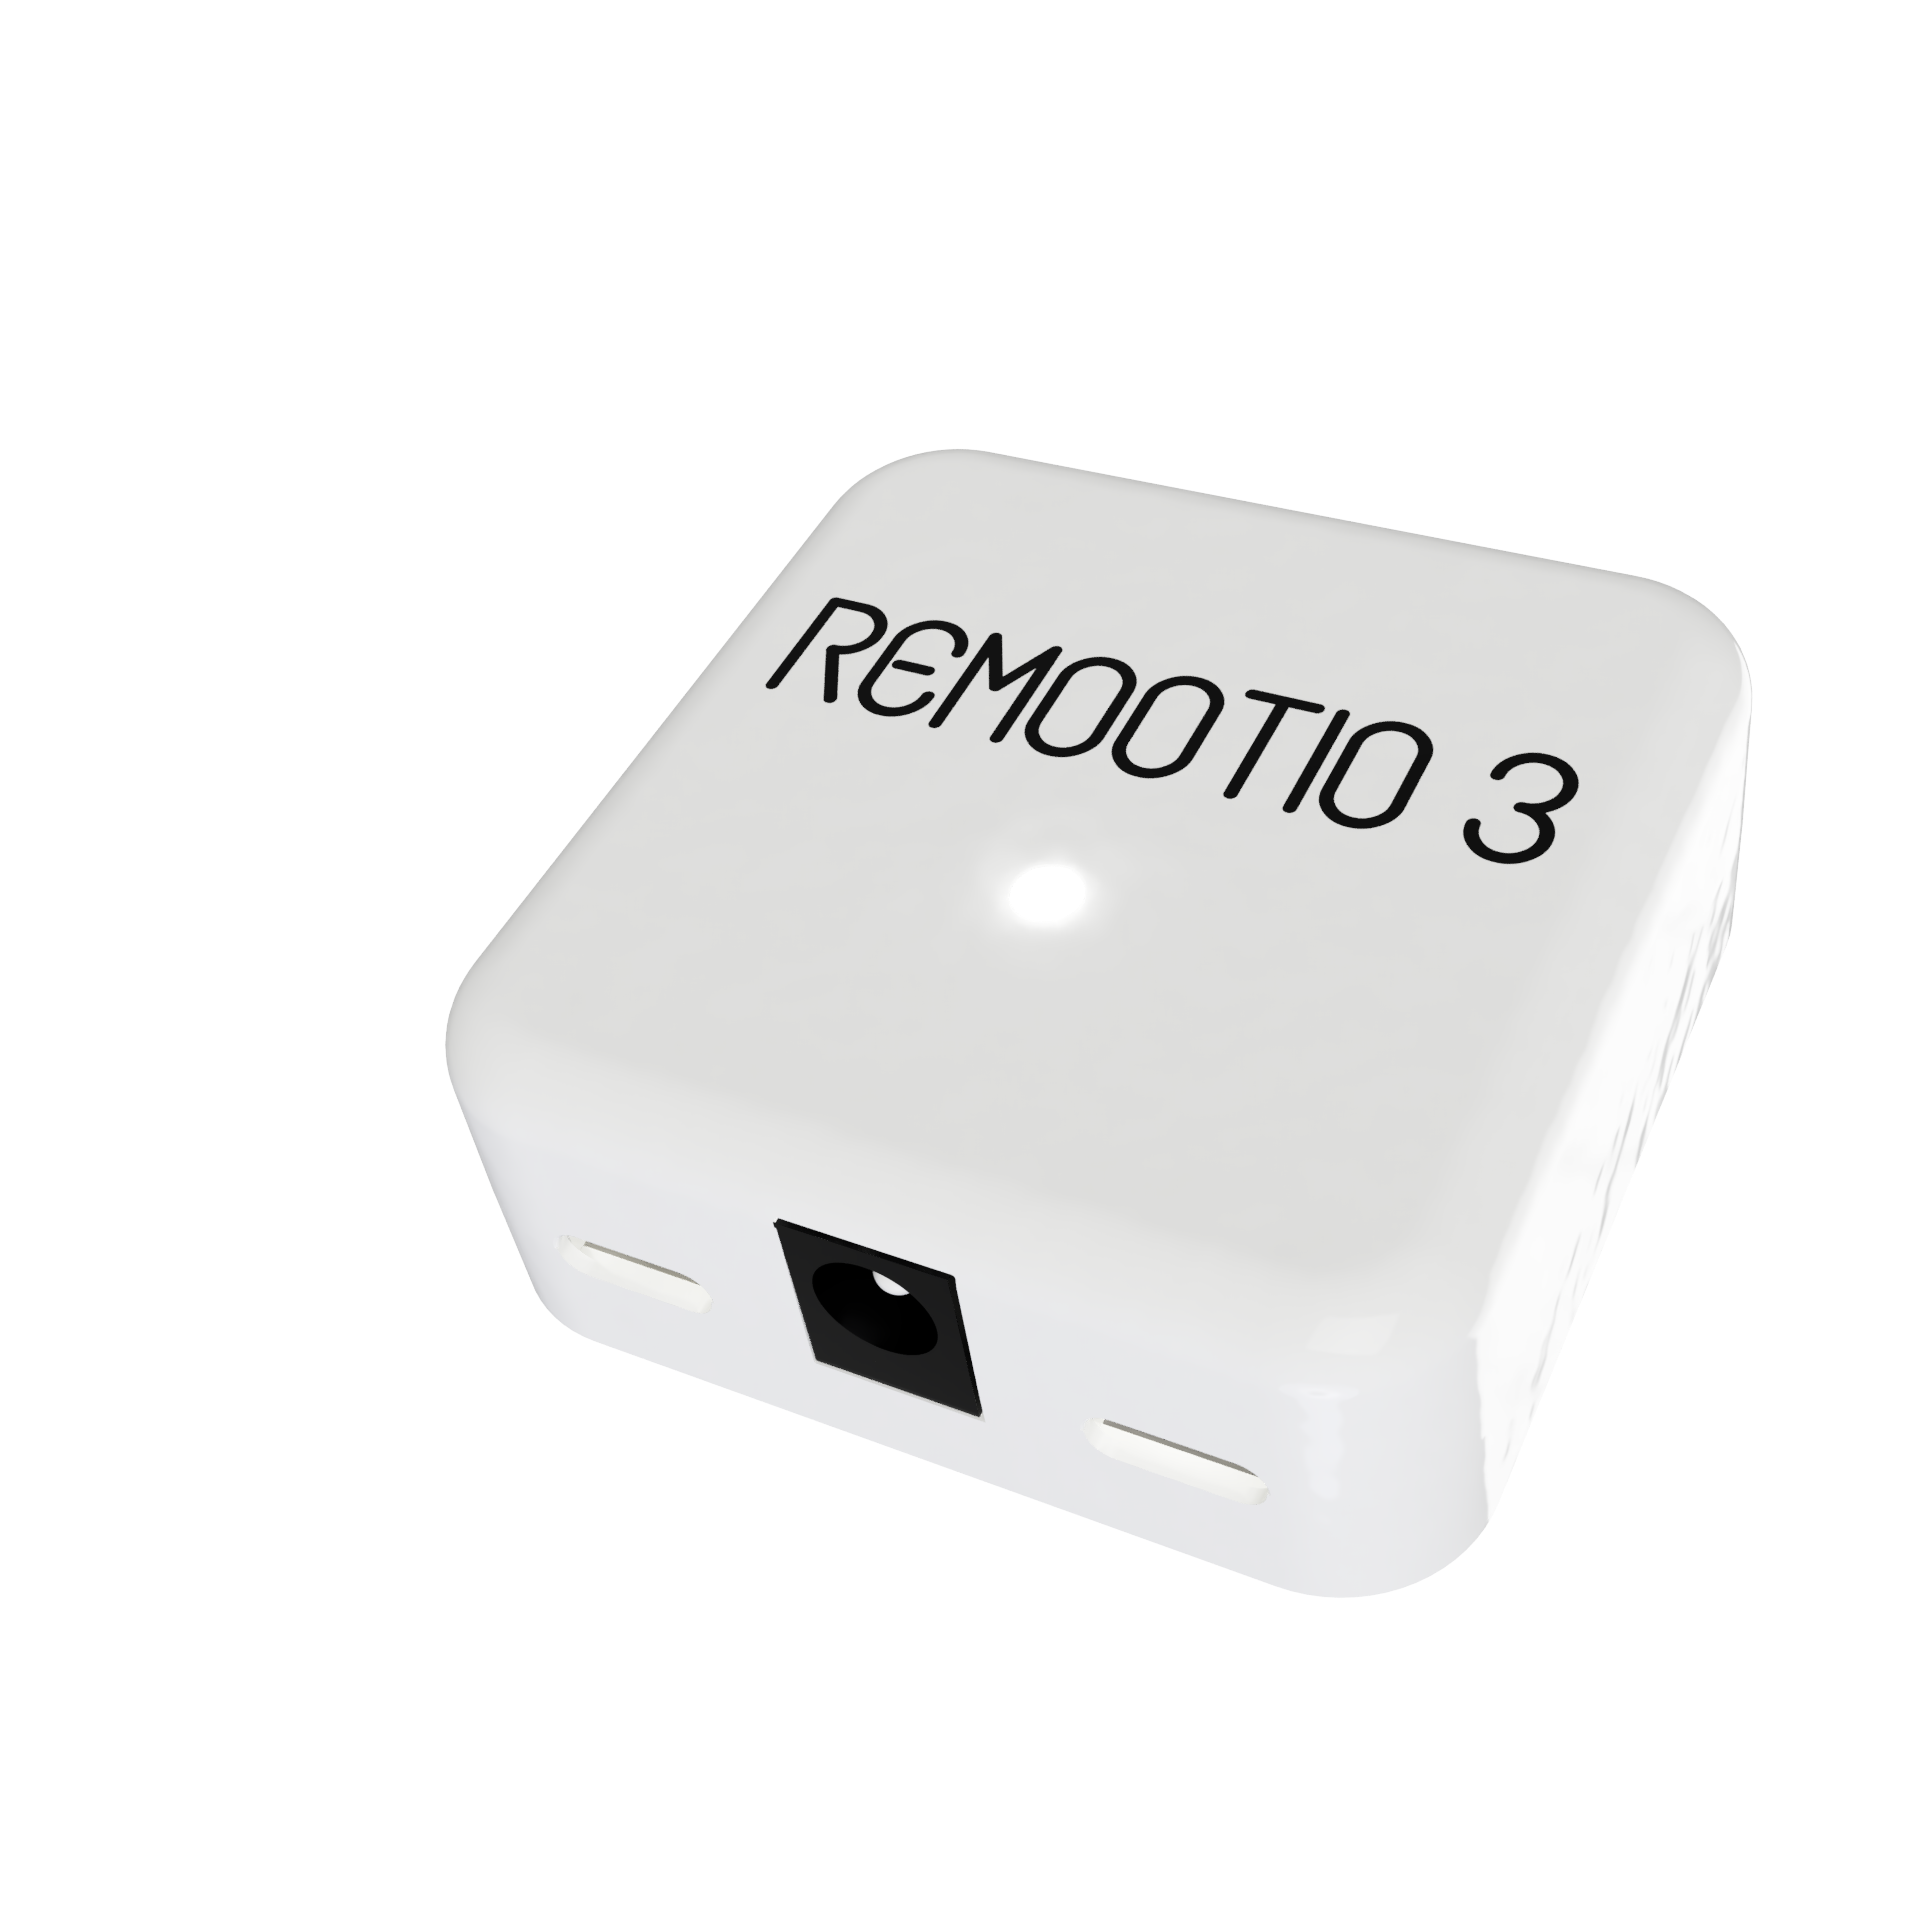 What's the difference between Remootio 3 and Remootio 2